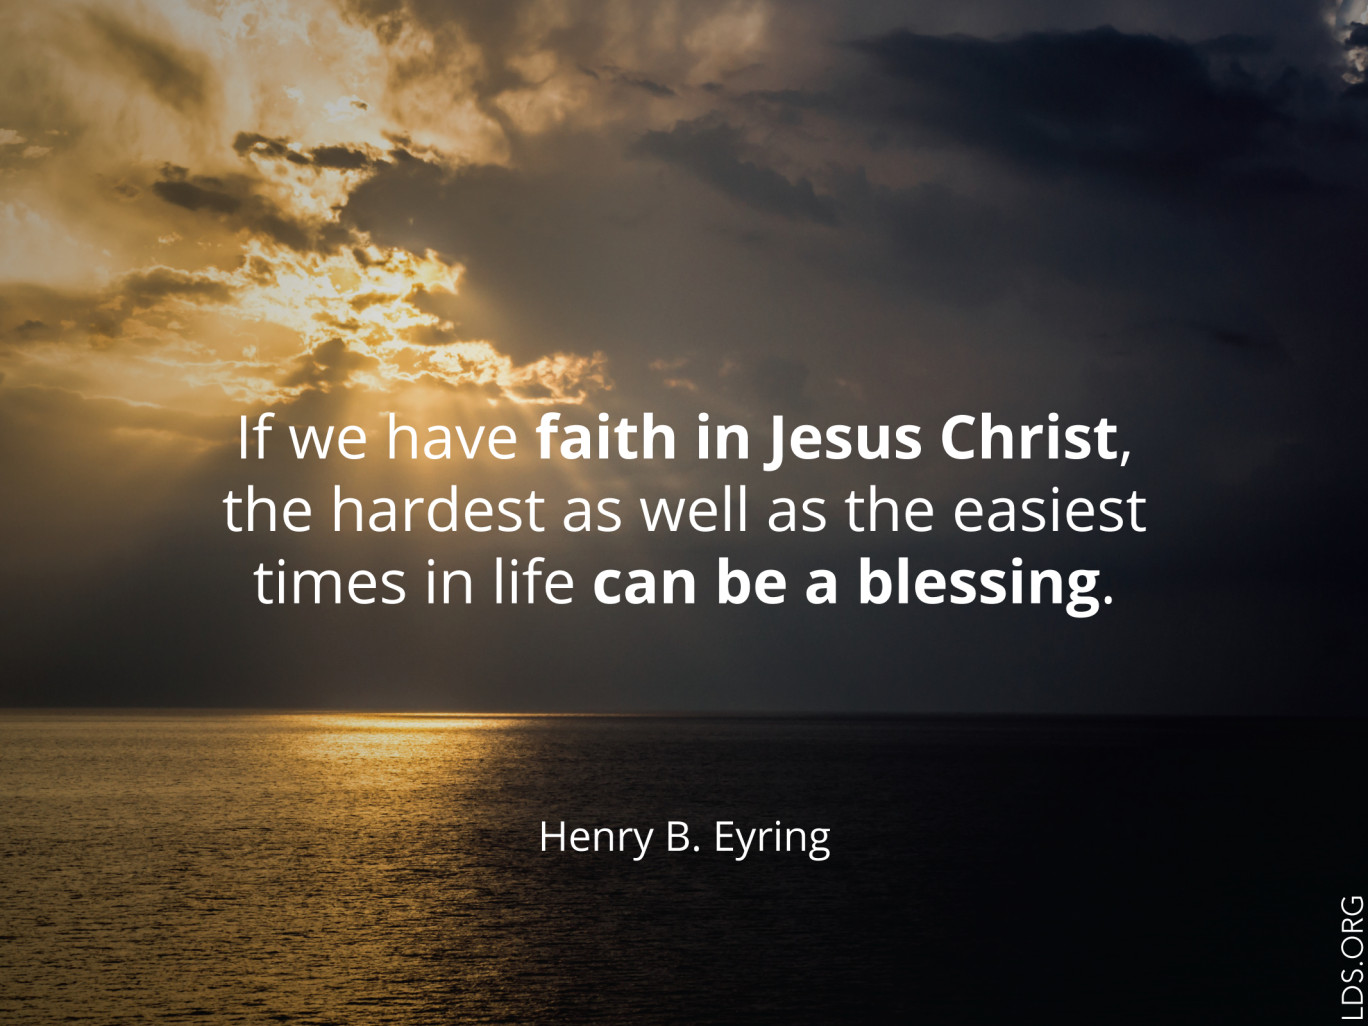 Which is the greatest blessing of the gospel in your life?